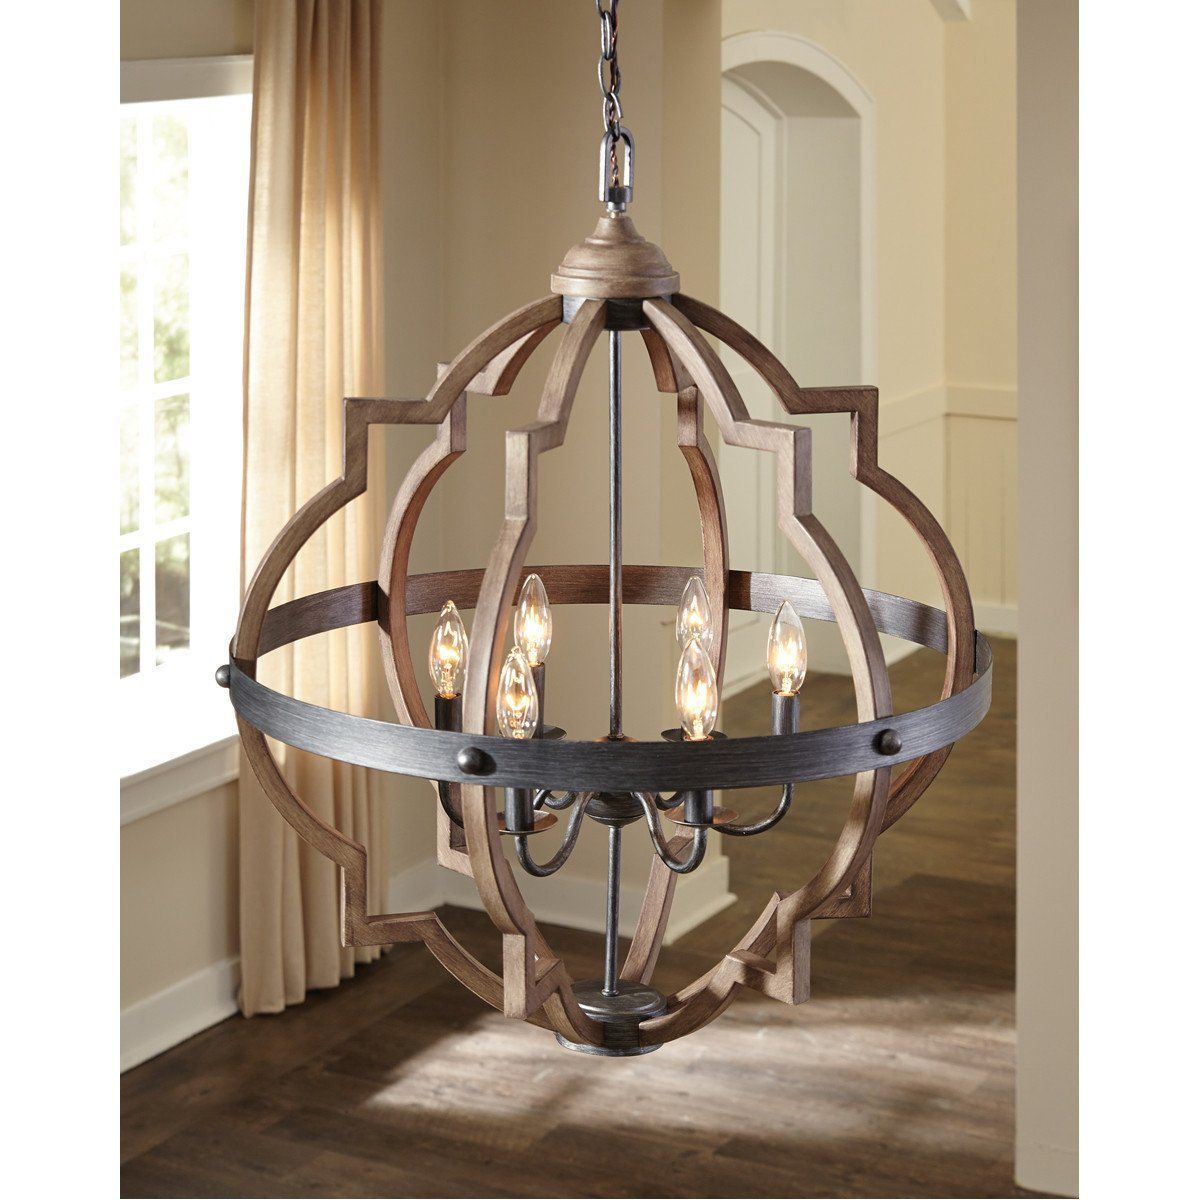 Sea Gull Lighting Stardust/cerused Oak Four Light Chandelier Intended For Bennington 4 Light Candle Style Chandeliers (View 10 of 30)